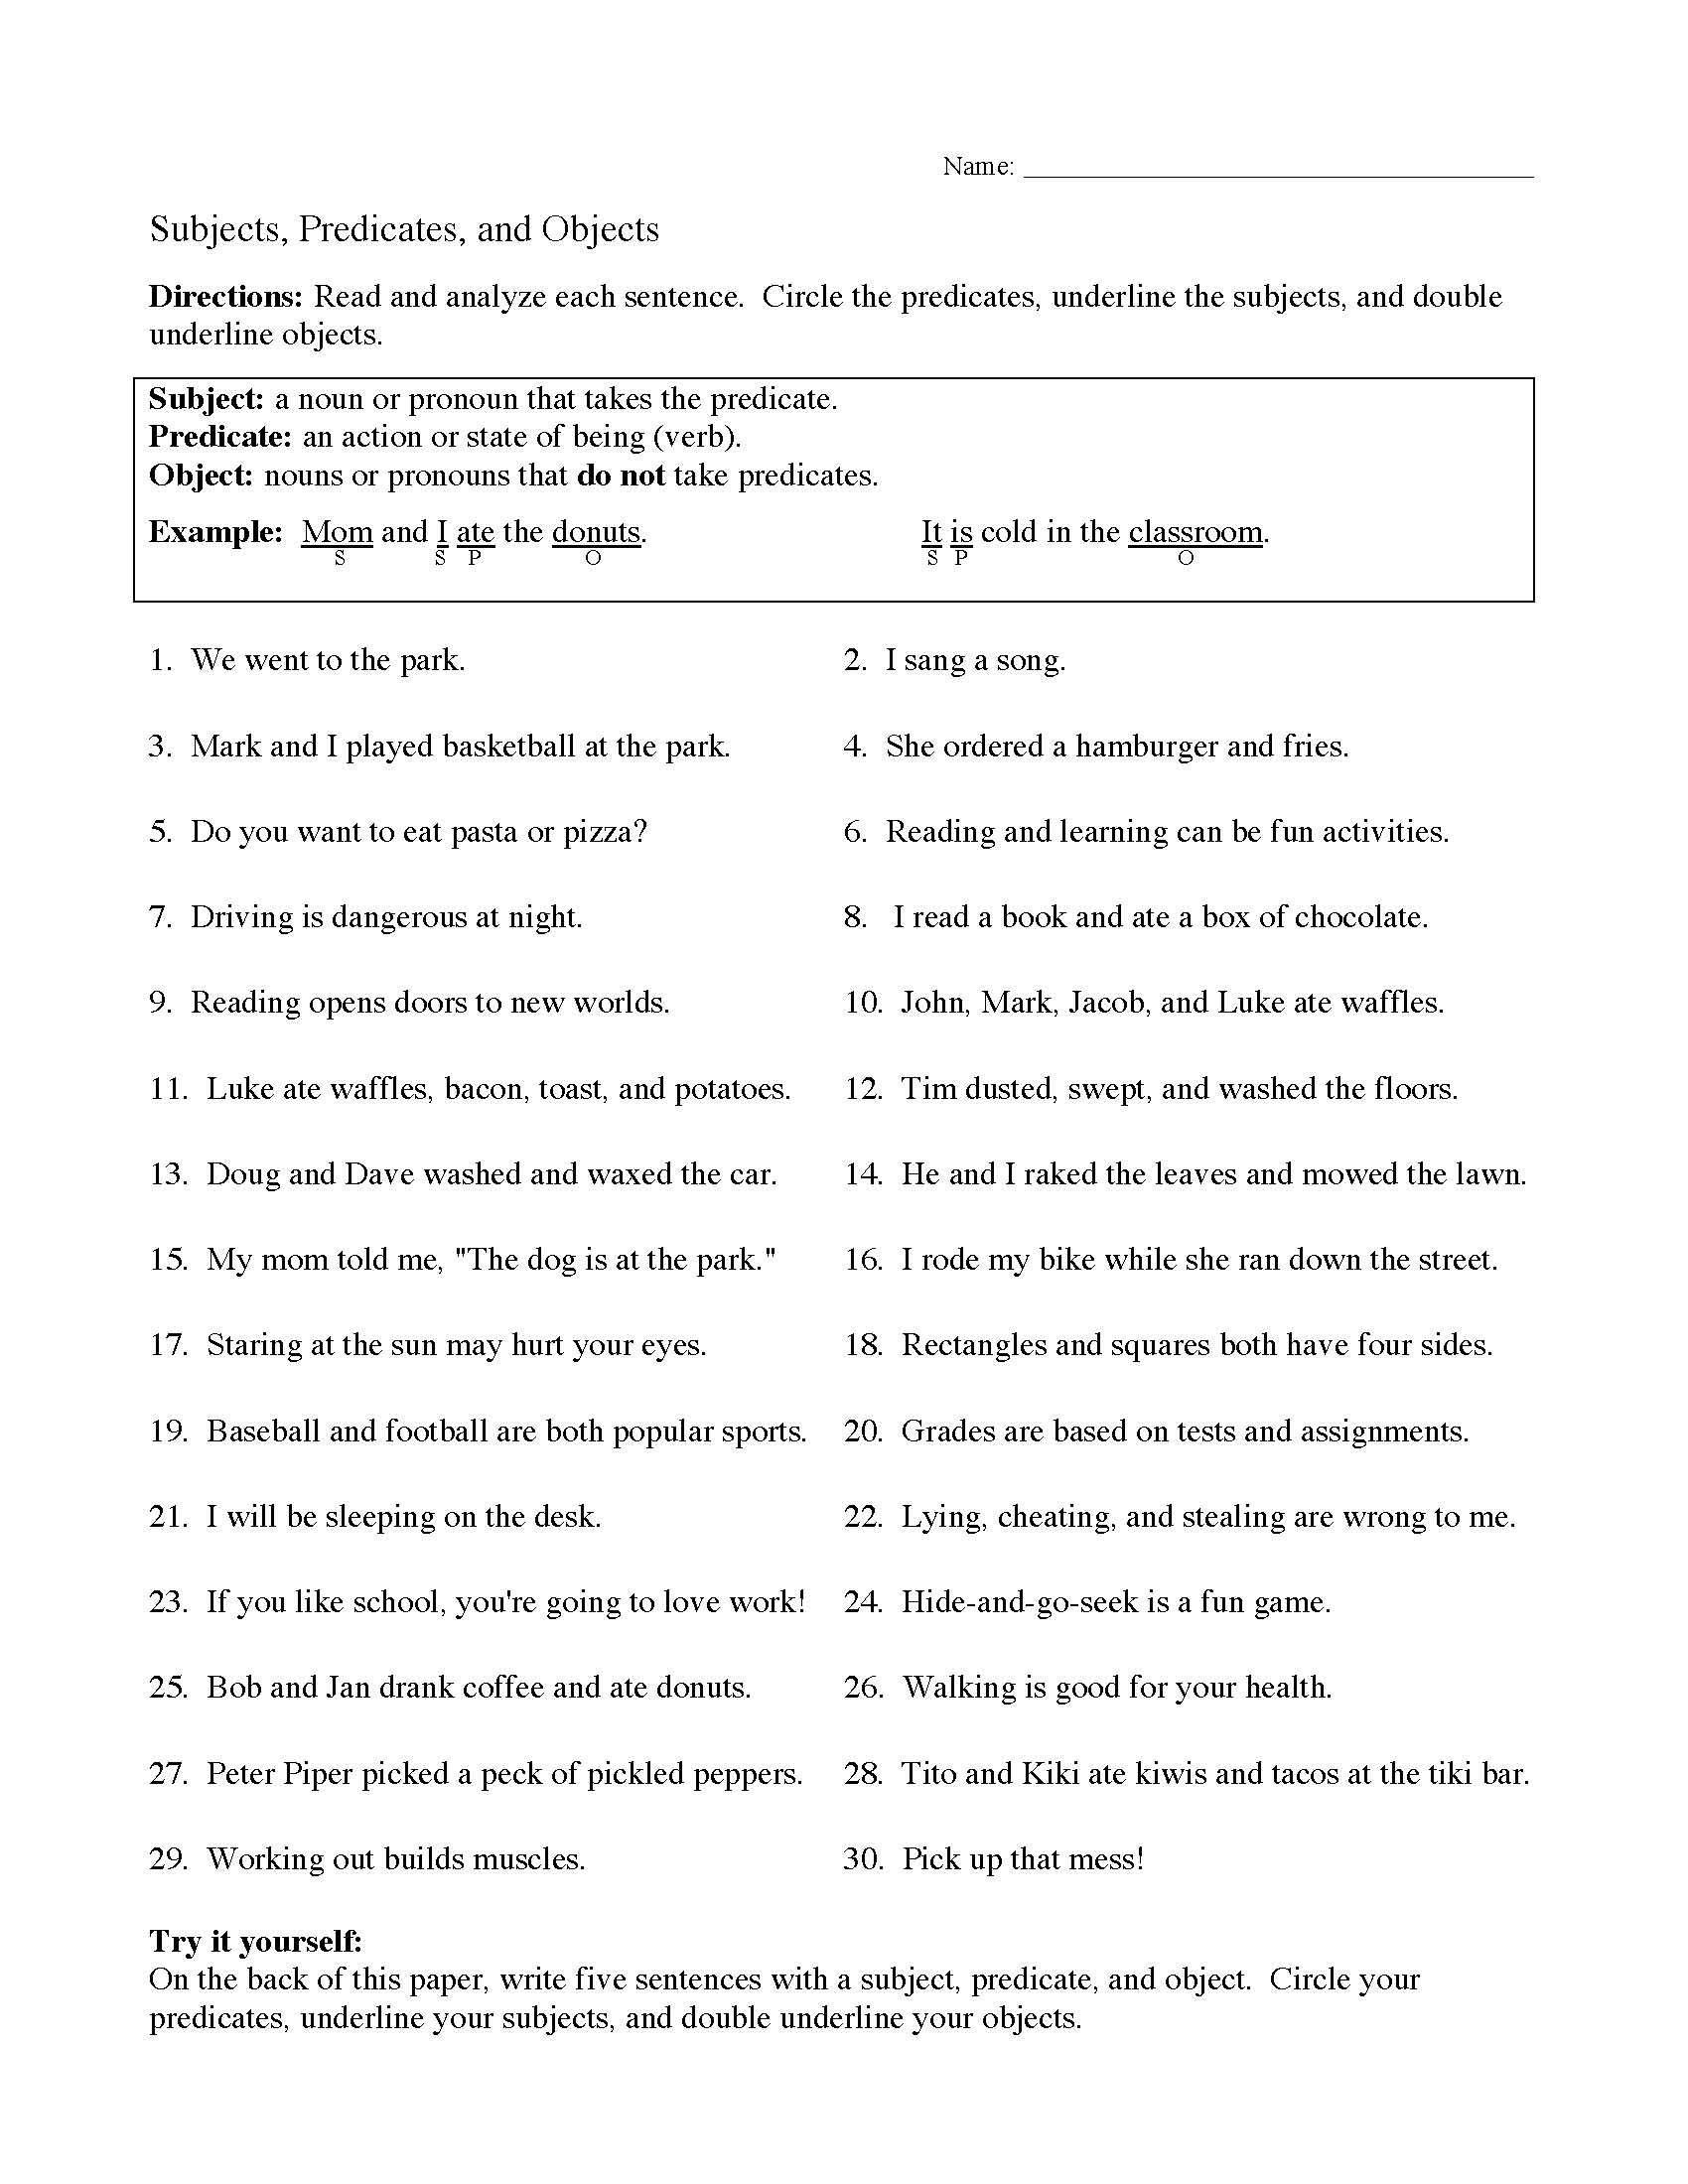 Subjects Predicates and Objects Worksheet 2 Preview